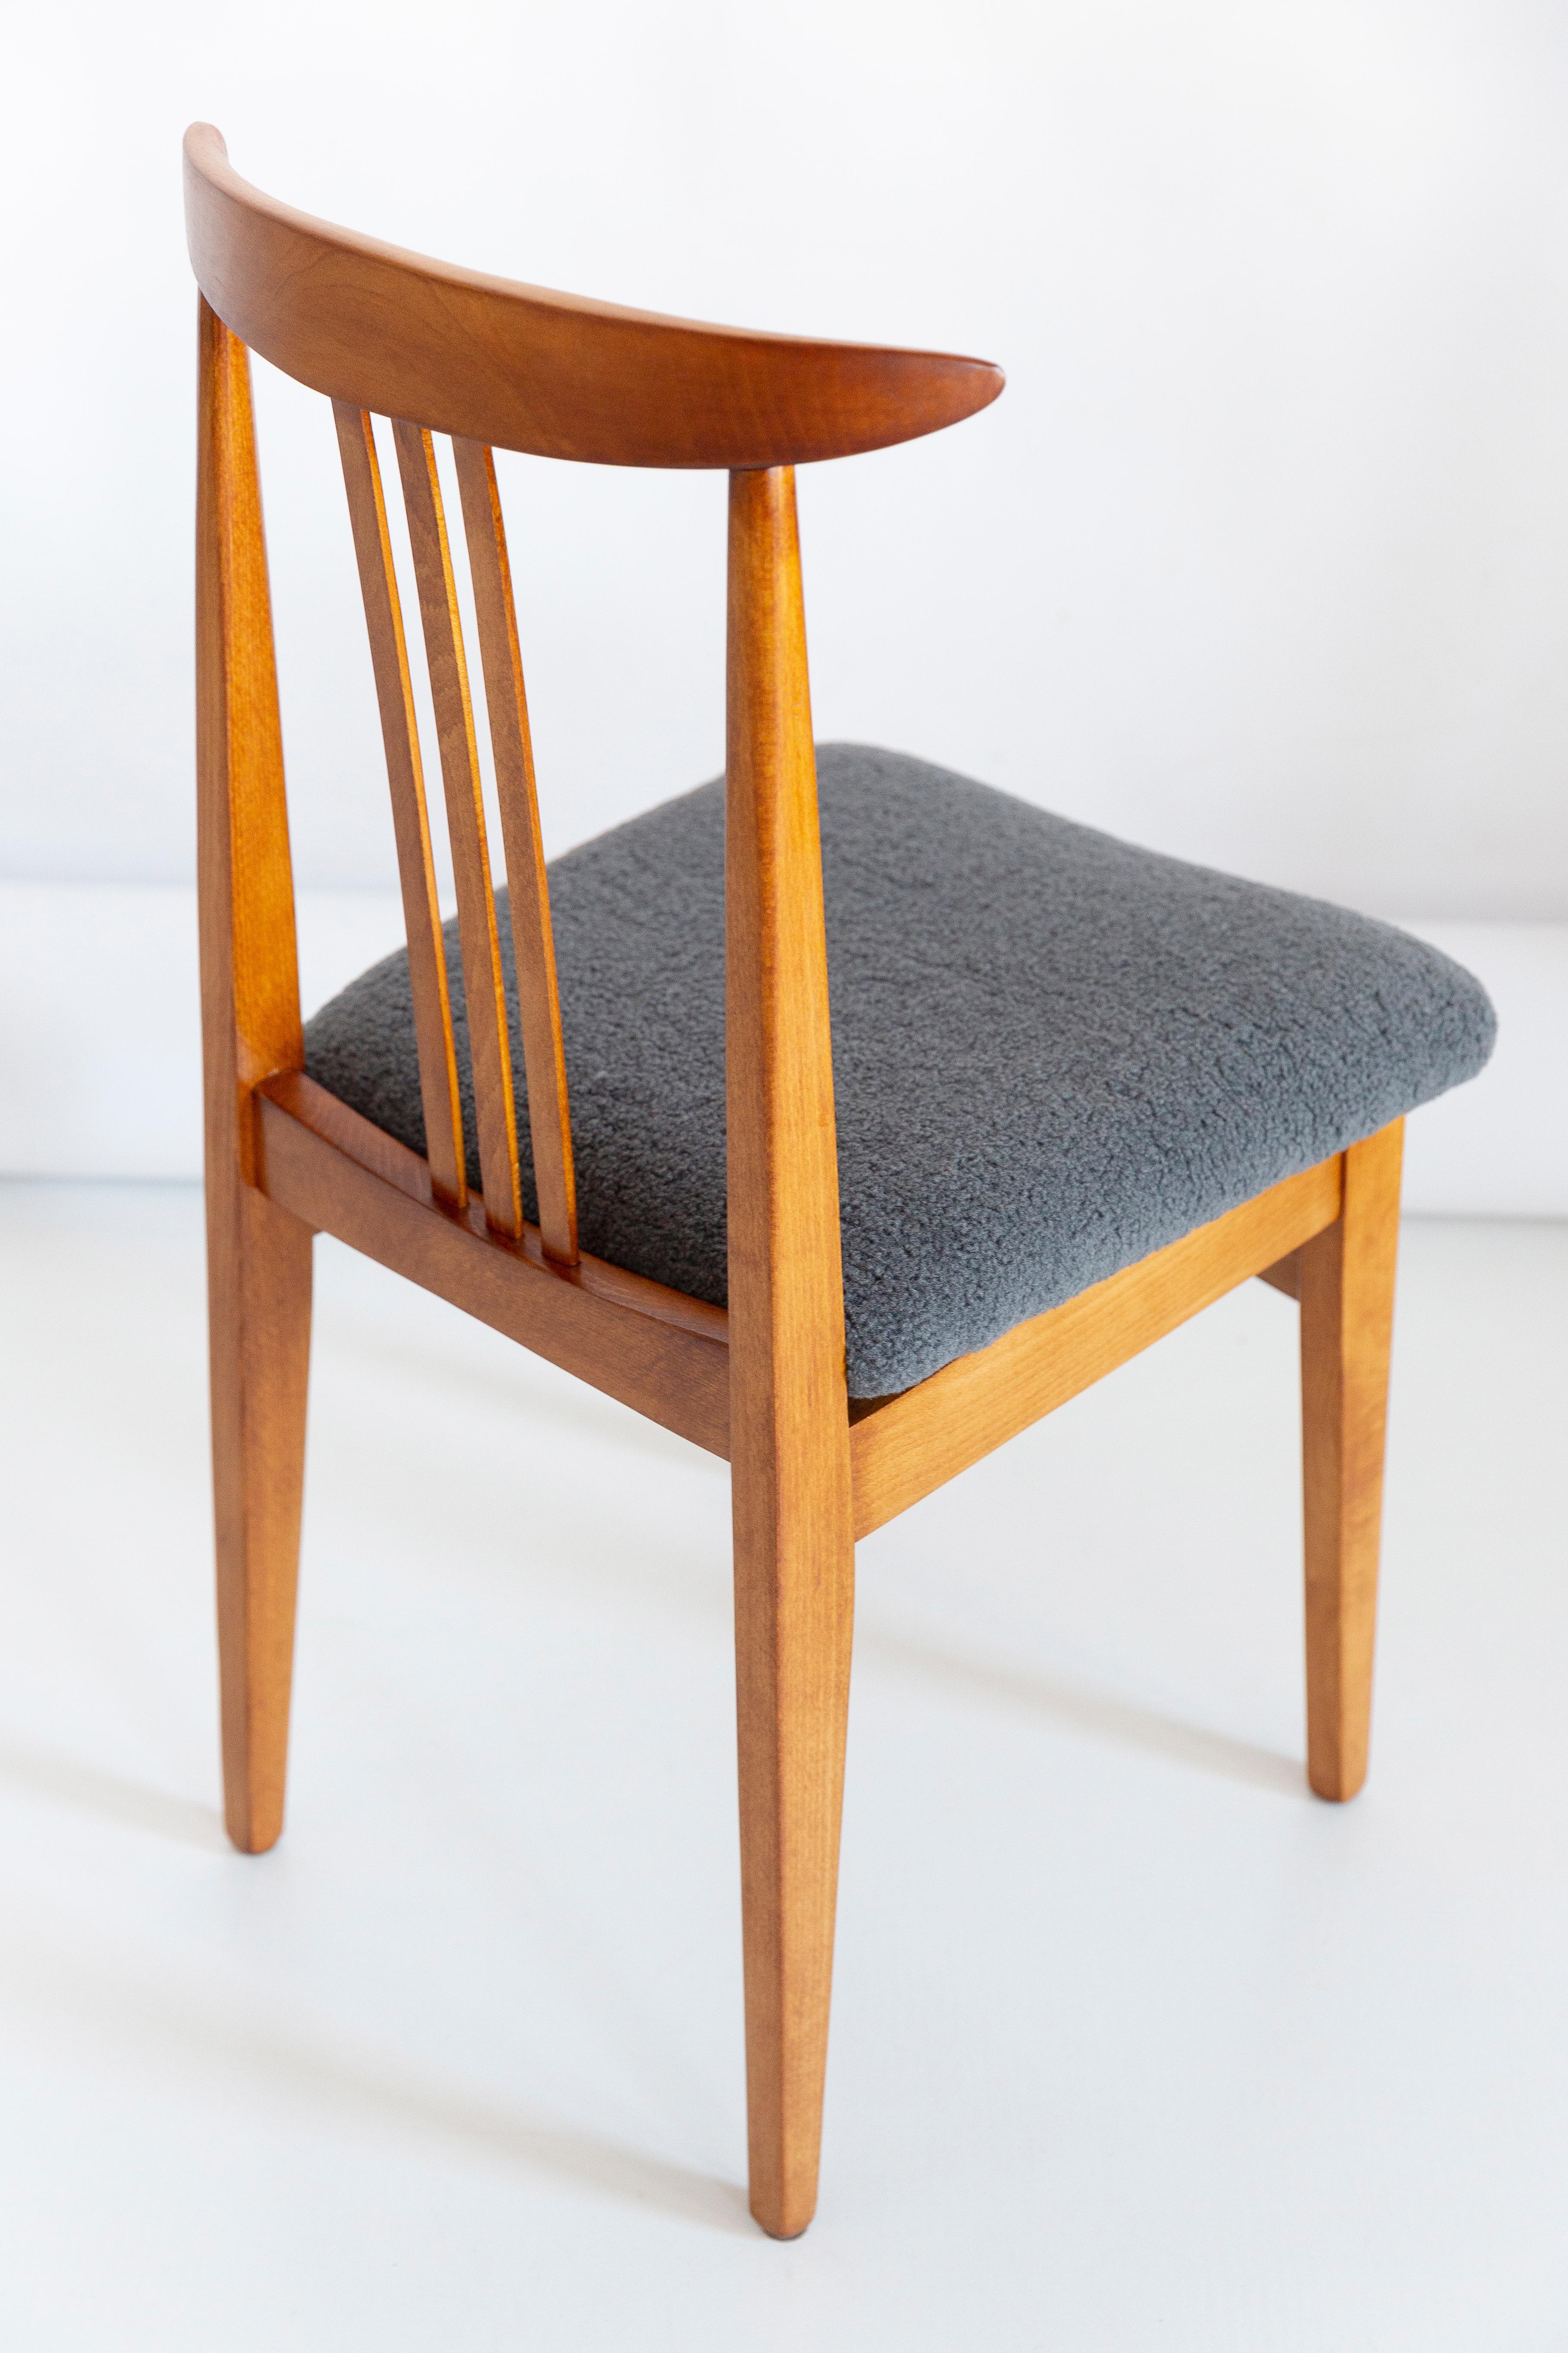 Hand-Crafted Mid-Century Modern Gray Boucle Chair, Designed by M. Zielinski, Europe, 1960s For Sale